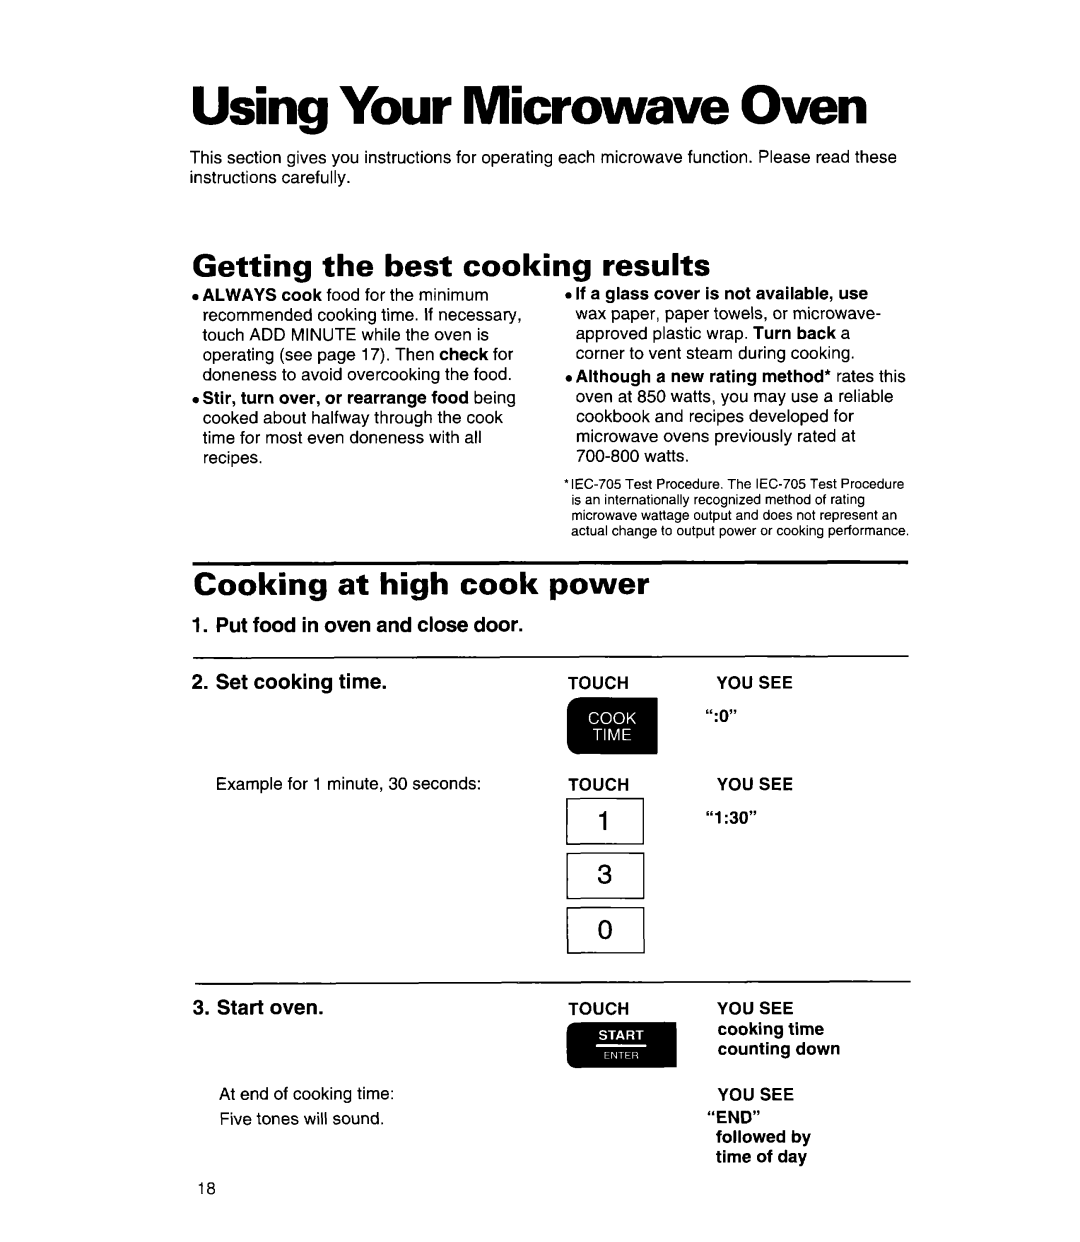 Whirlpool MT7078XD Getting - the best cooking, results, Cooking at high cook power, Put food in oven and close door 